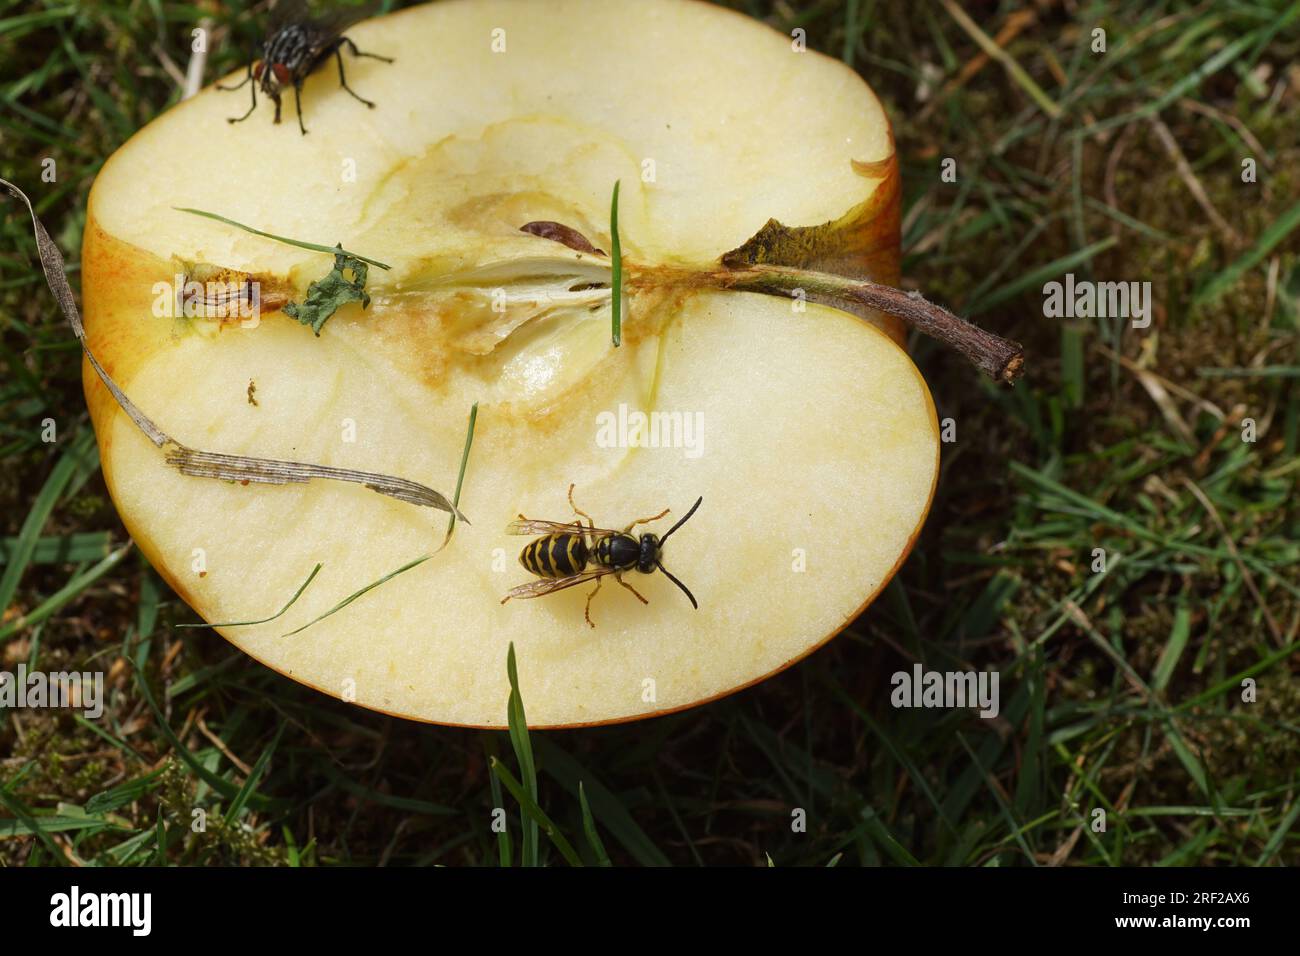 Half an apple with core in the grass with an eating Common wasp (Vespula vulgaris), family Vespidae and Flesh fly, Sarcophaga. Lawn, Summer, July Stock Photo